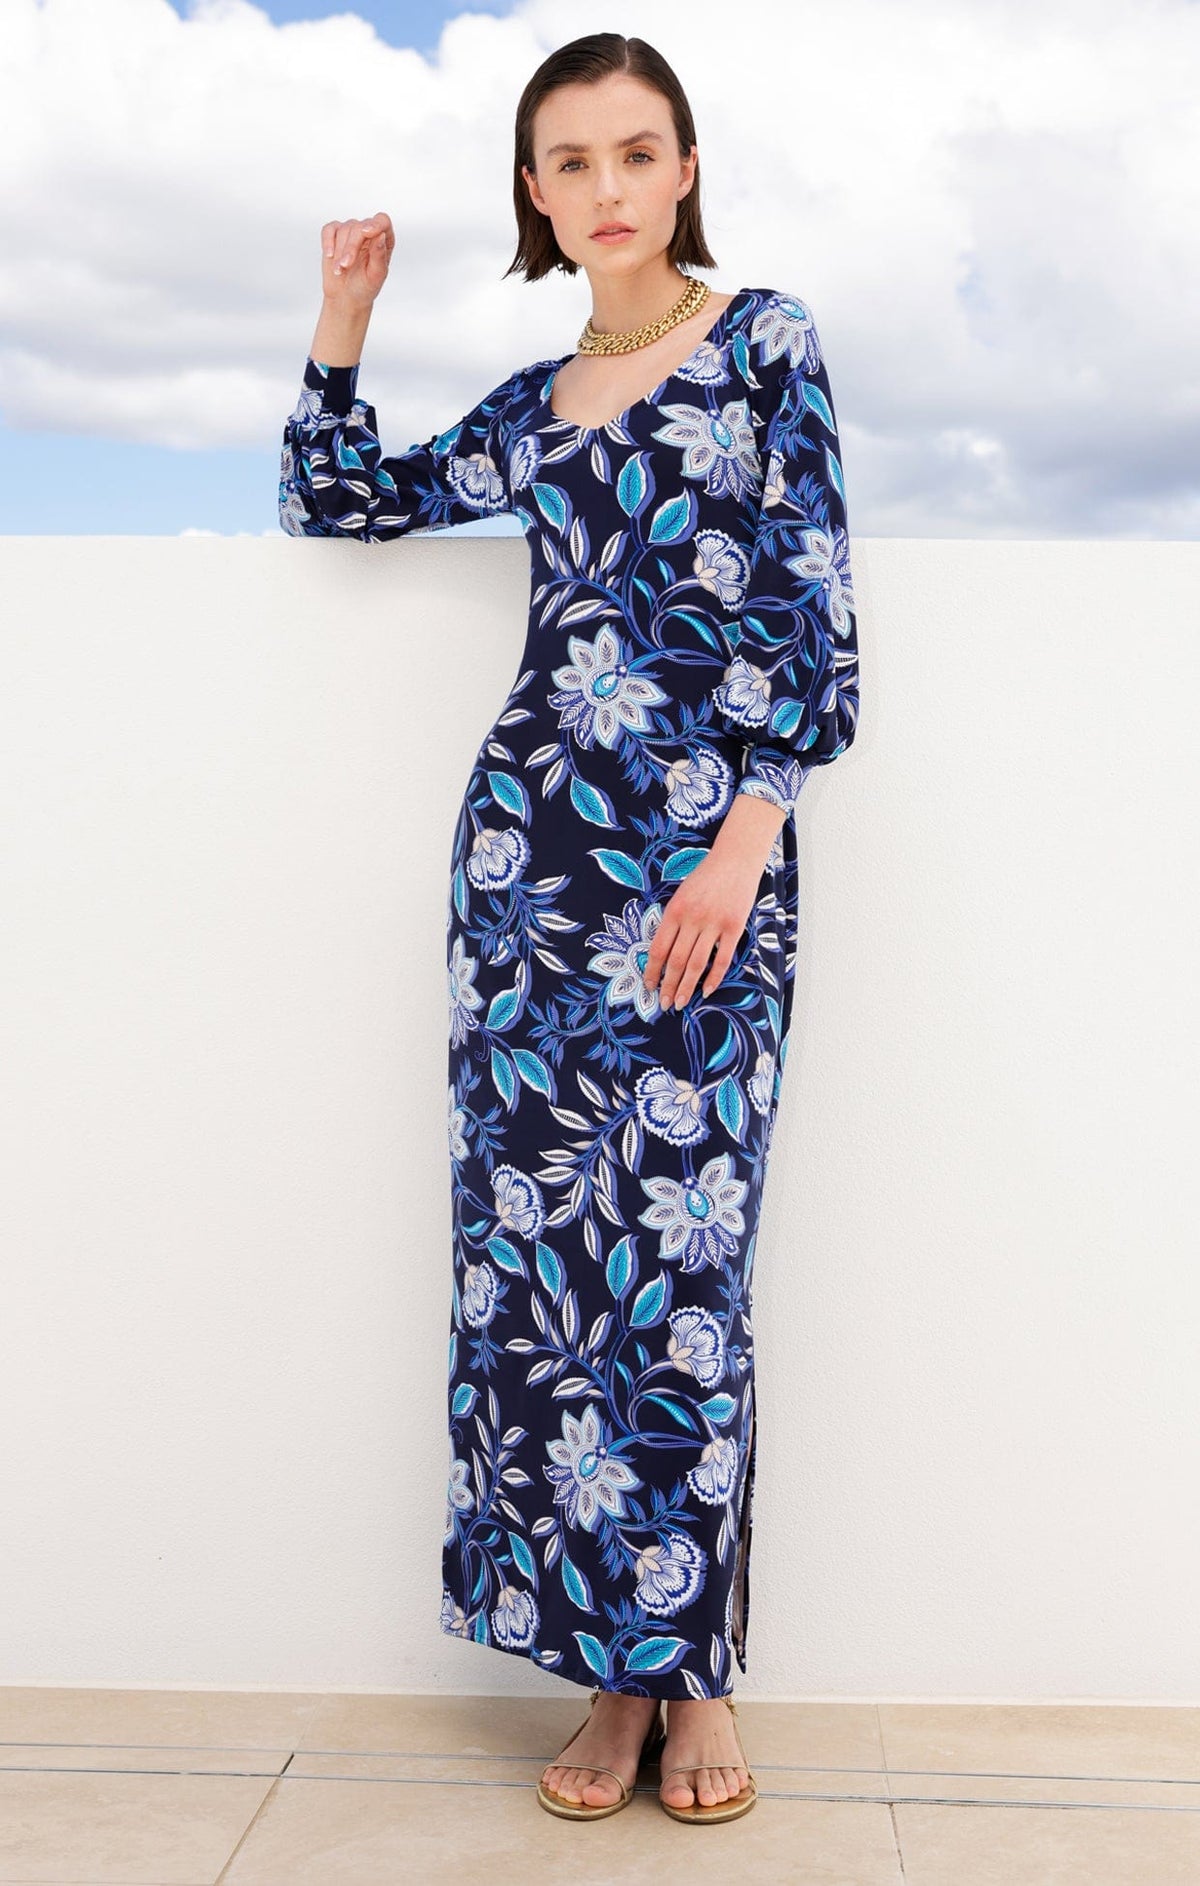 Dresses Multi Occasion WILD FLOWER MAXI IN BLUE PAISLEY FLORAL